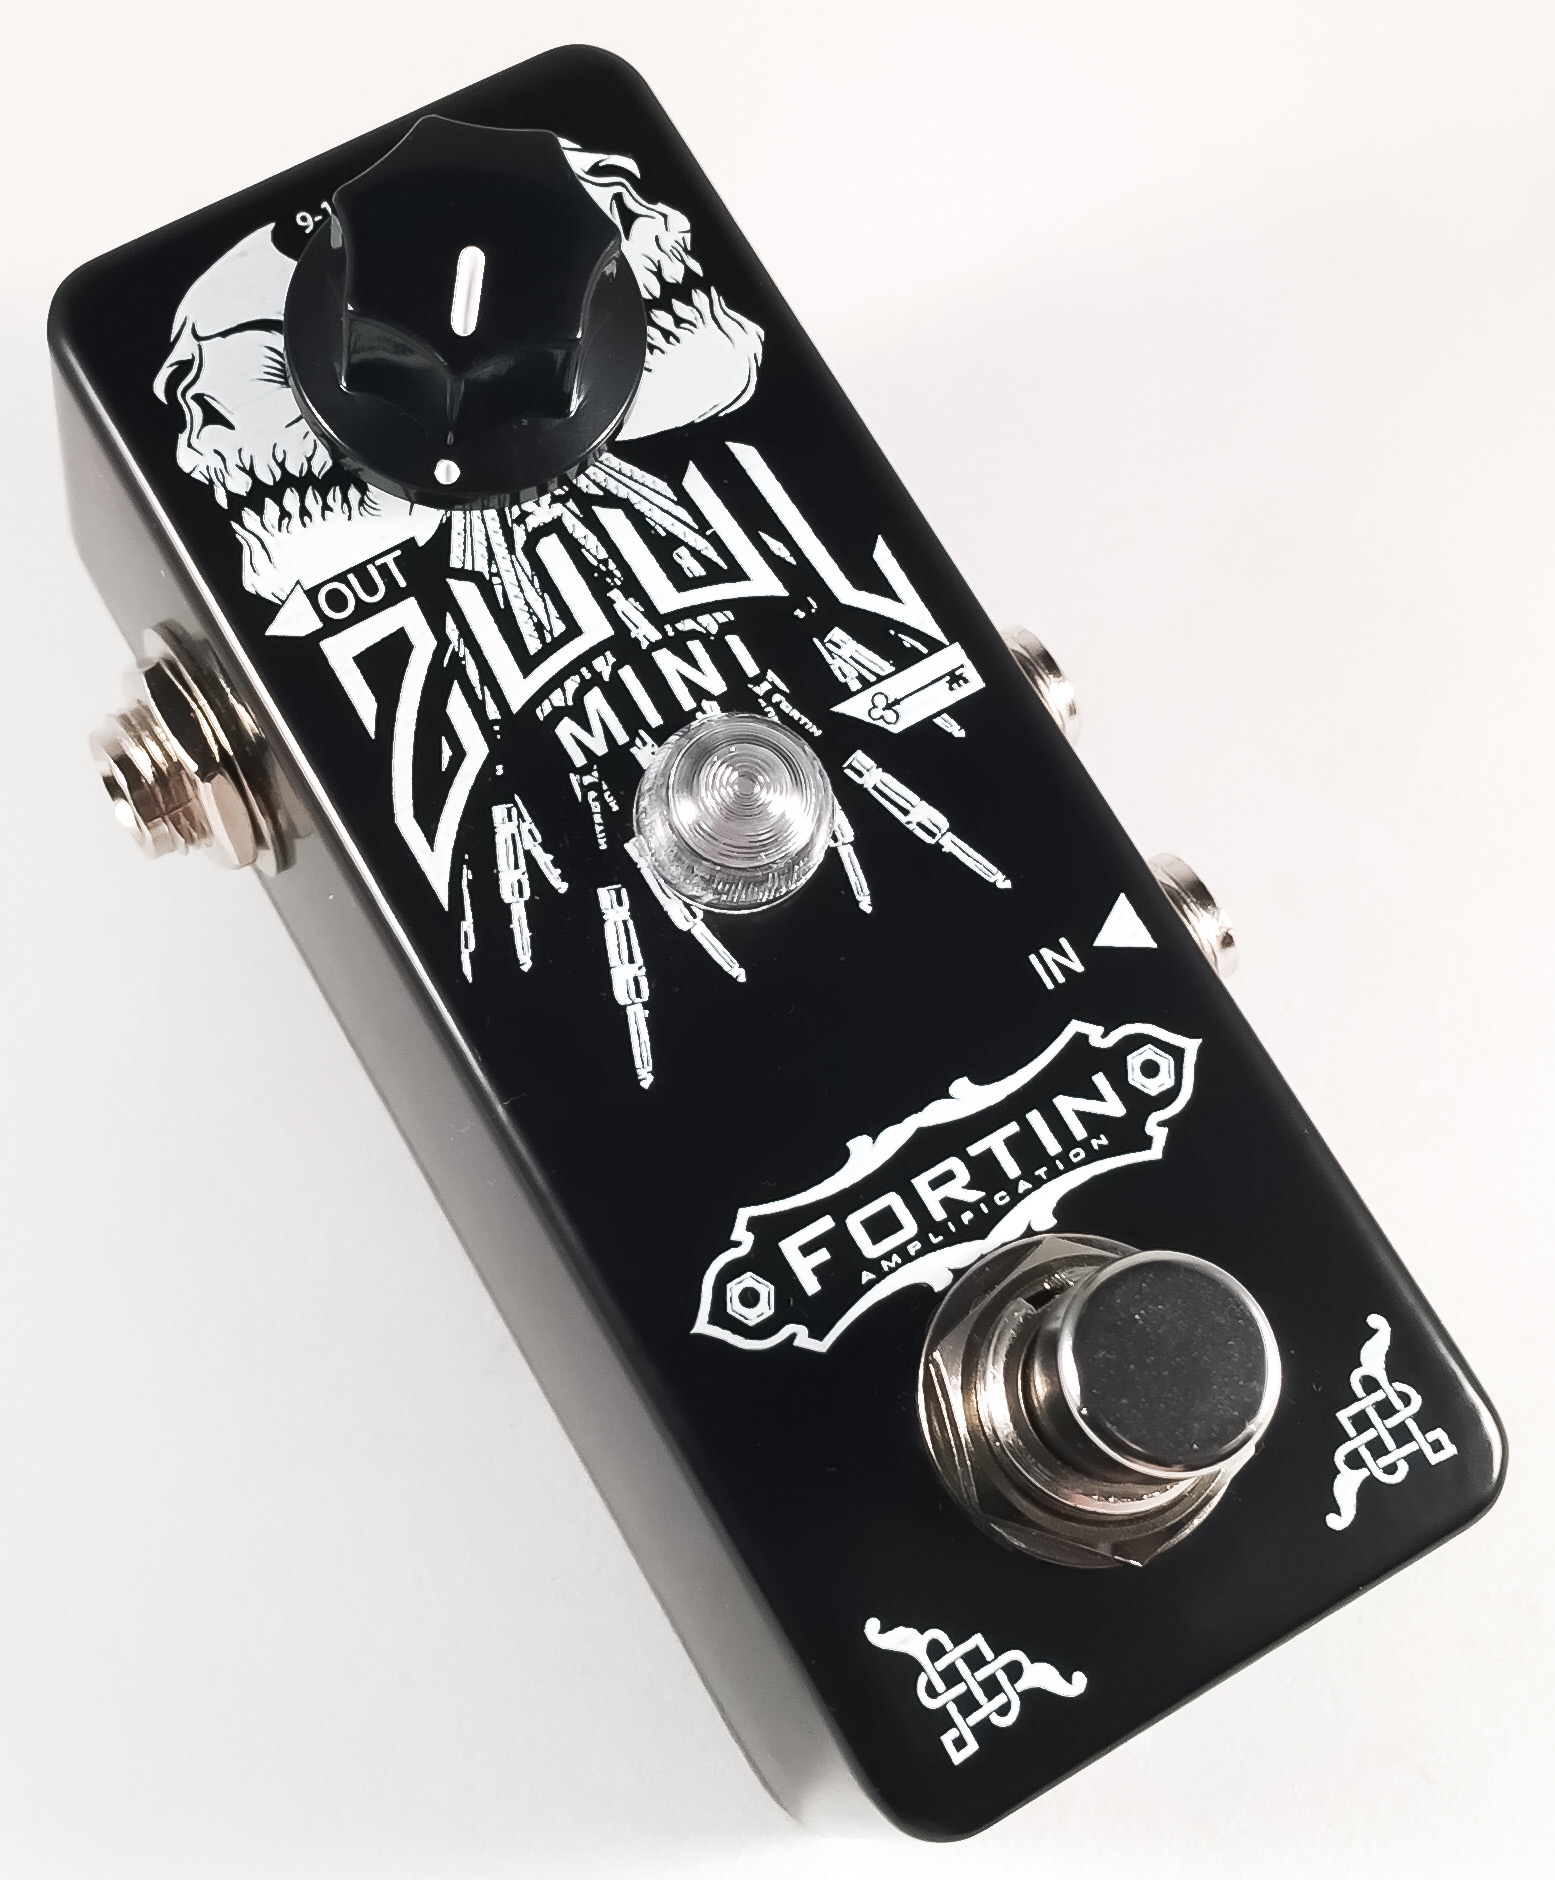 Fortin Amps Mini Zuul Noise Gate - Compressor, sustain & noise gate effect pedal - Variation 1